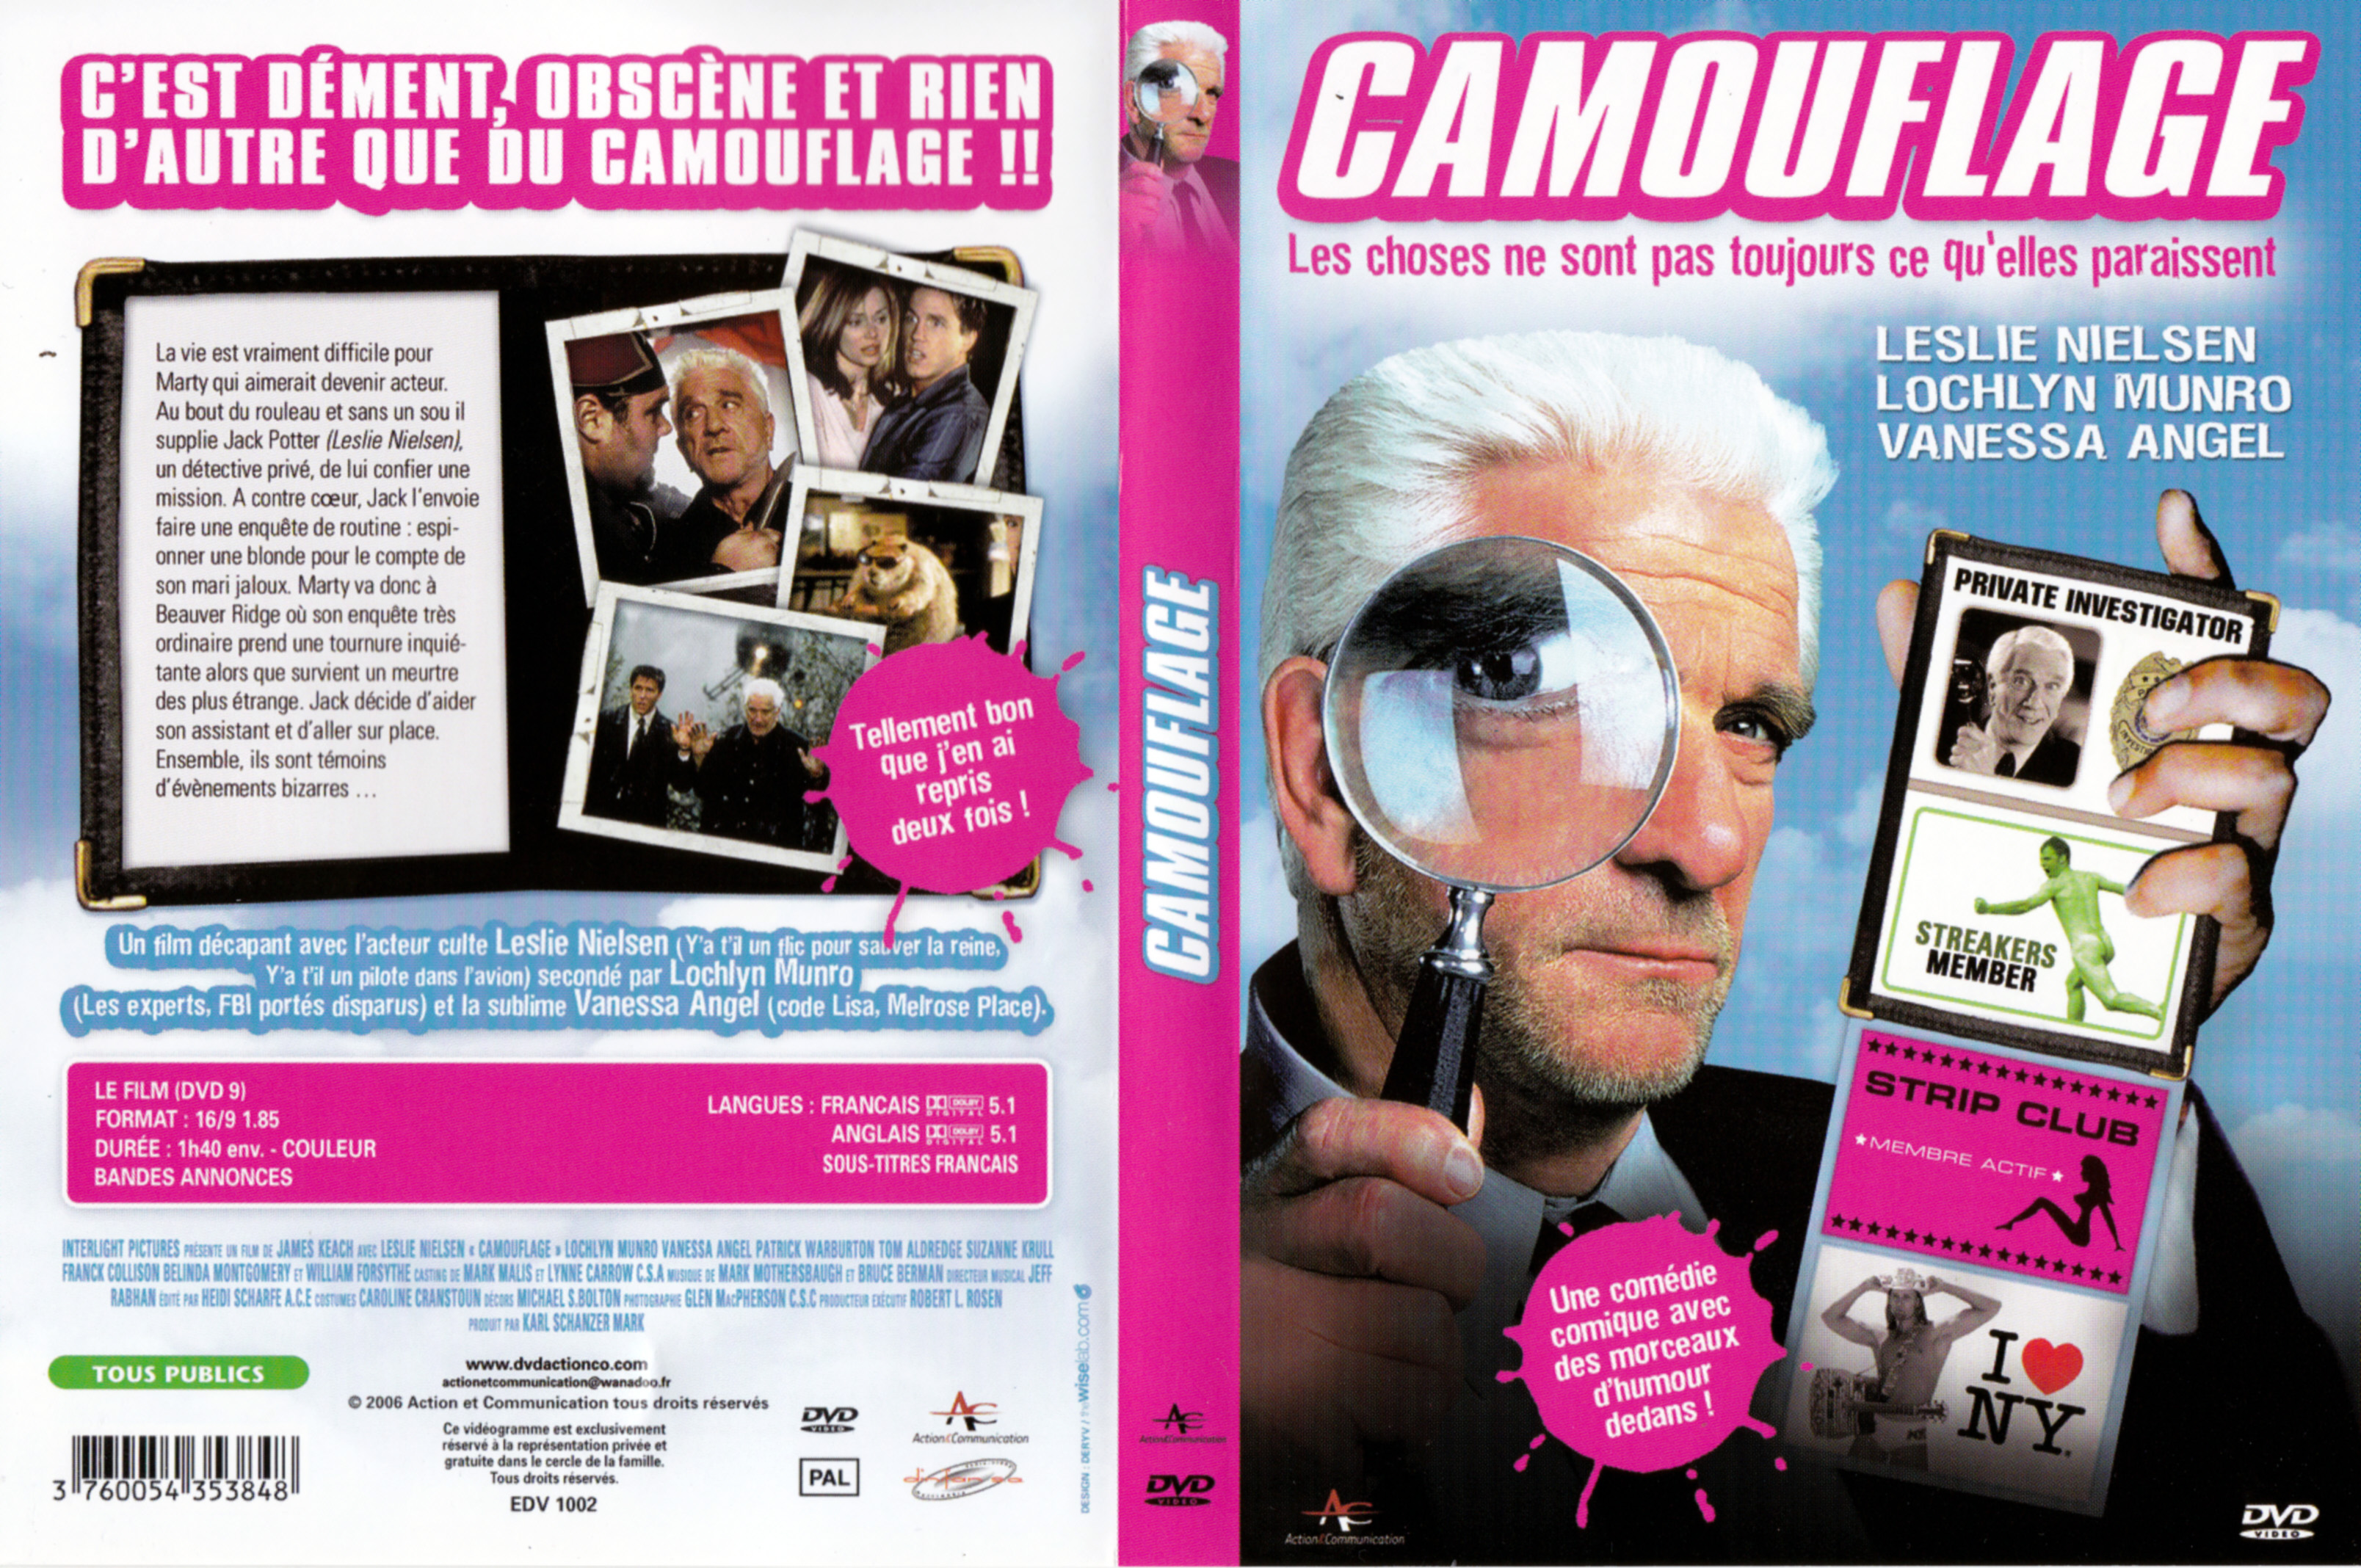 Jaquette DVD Camouflage (2001)